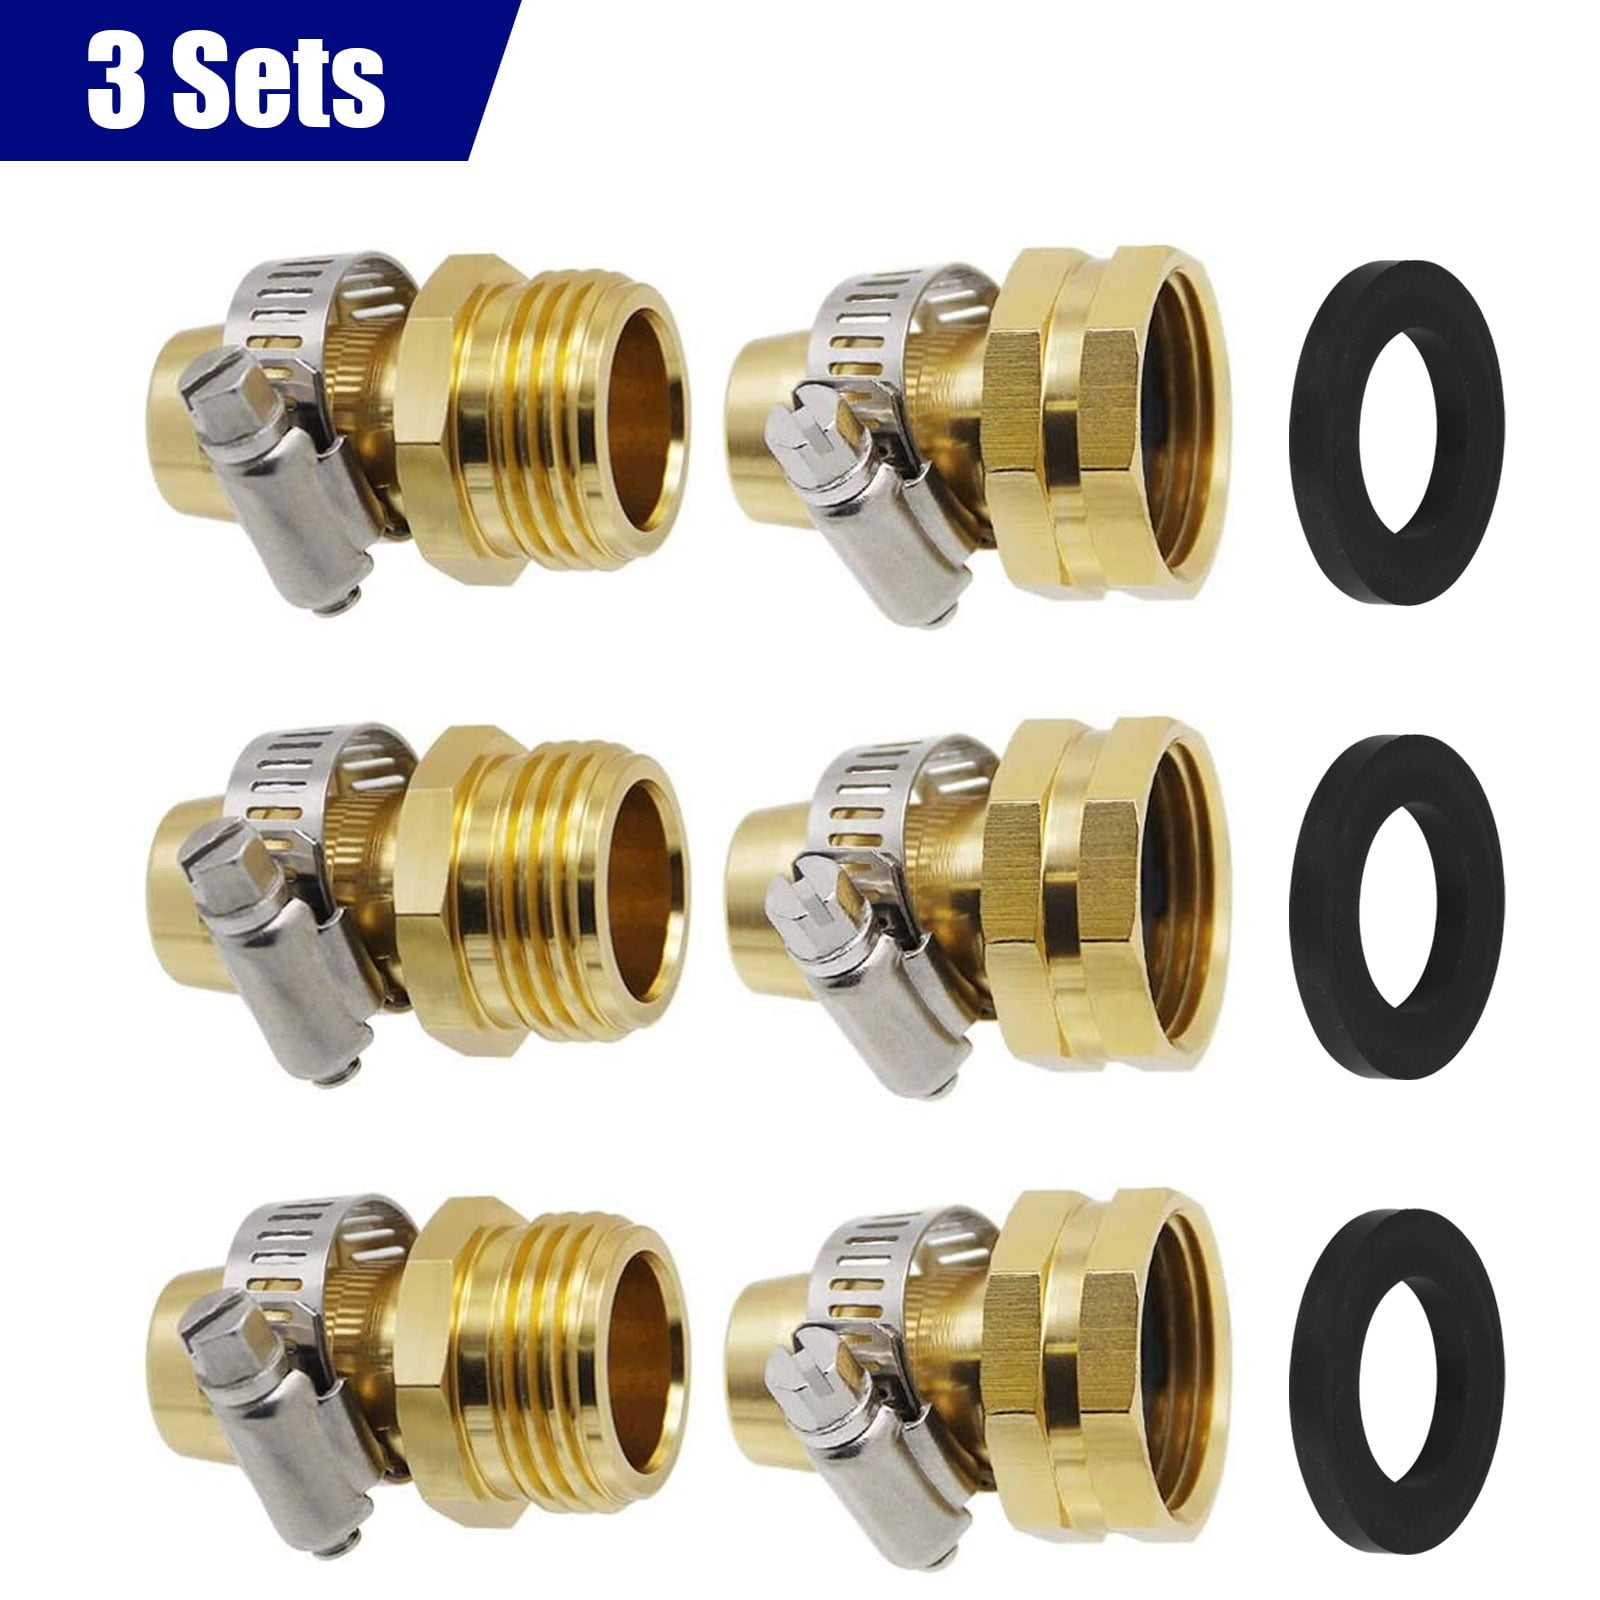 No-Leaks Water Hoses Quick Connect Release 3/4 Inch Garden Aluminum Hose Fitting Quick Connector Male and Female Value Pack 6 Set with 6 Sealed O-Rings